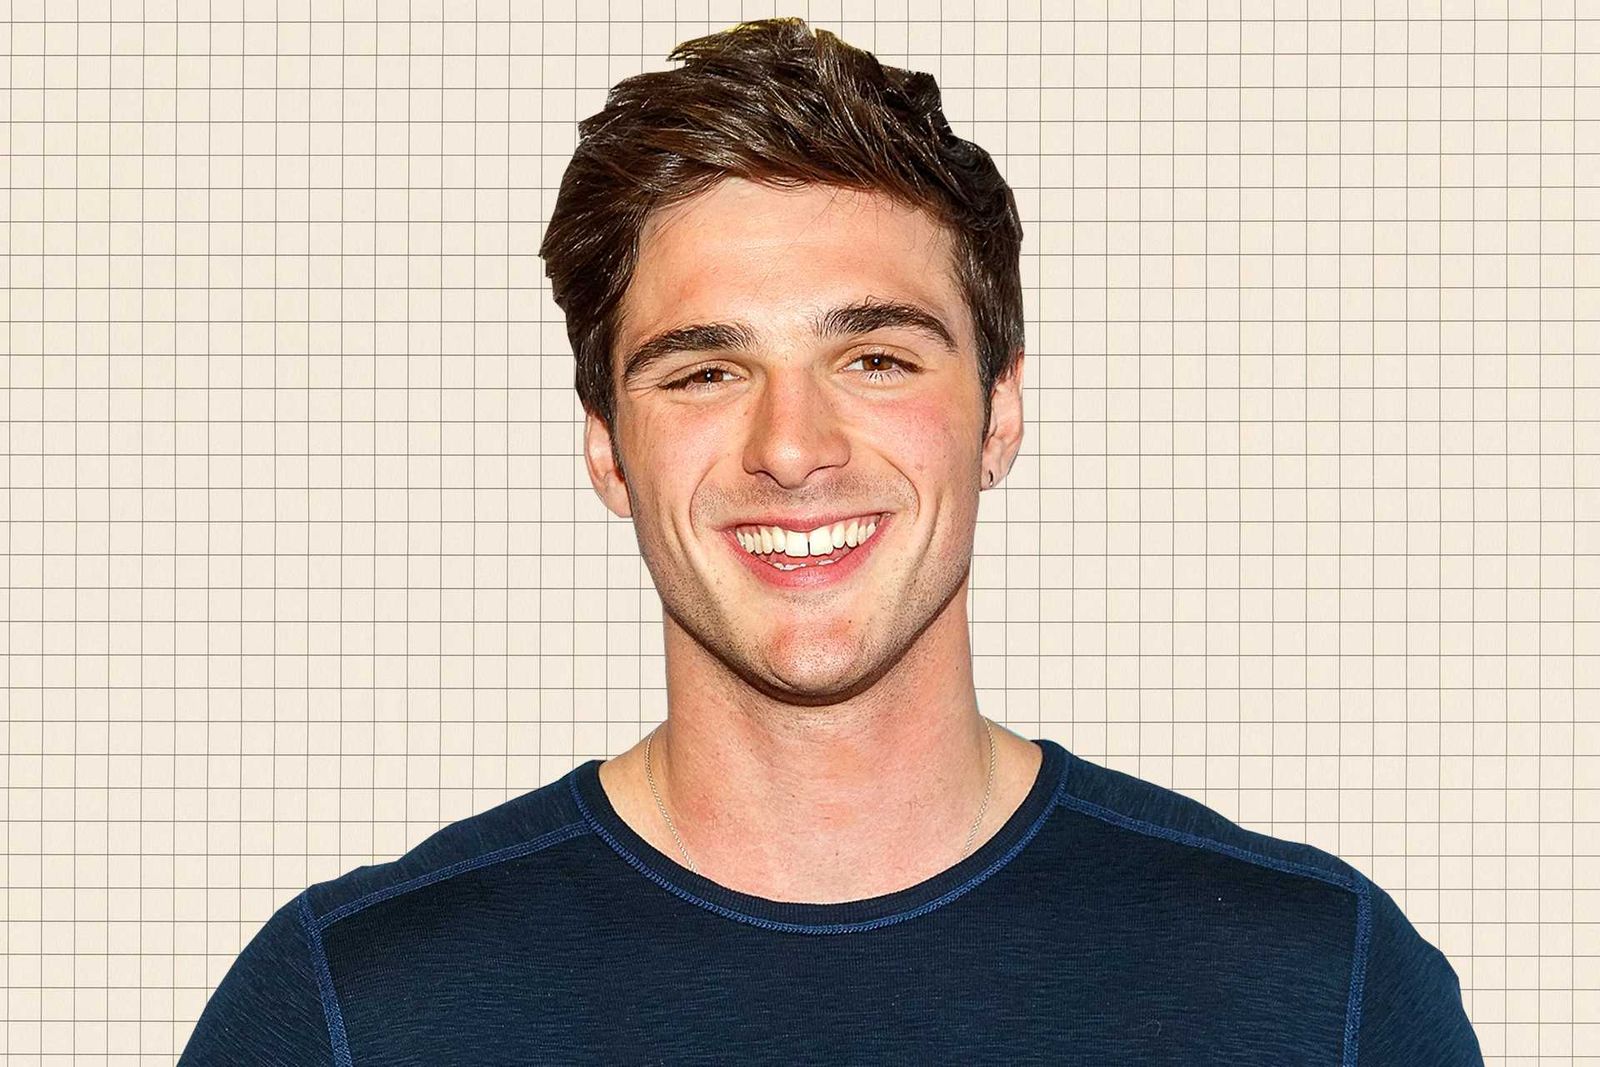 'I saw Jacob in him very easily' - Euphoria star Jacob Elordi's $20 million He Went That Way catches Hollywood's eye